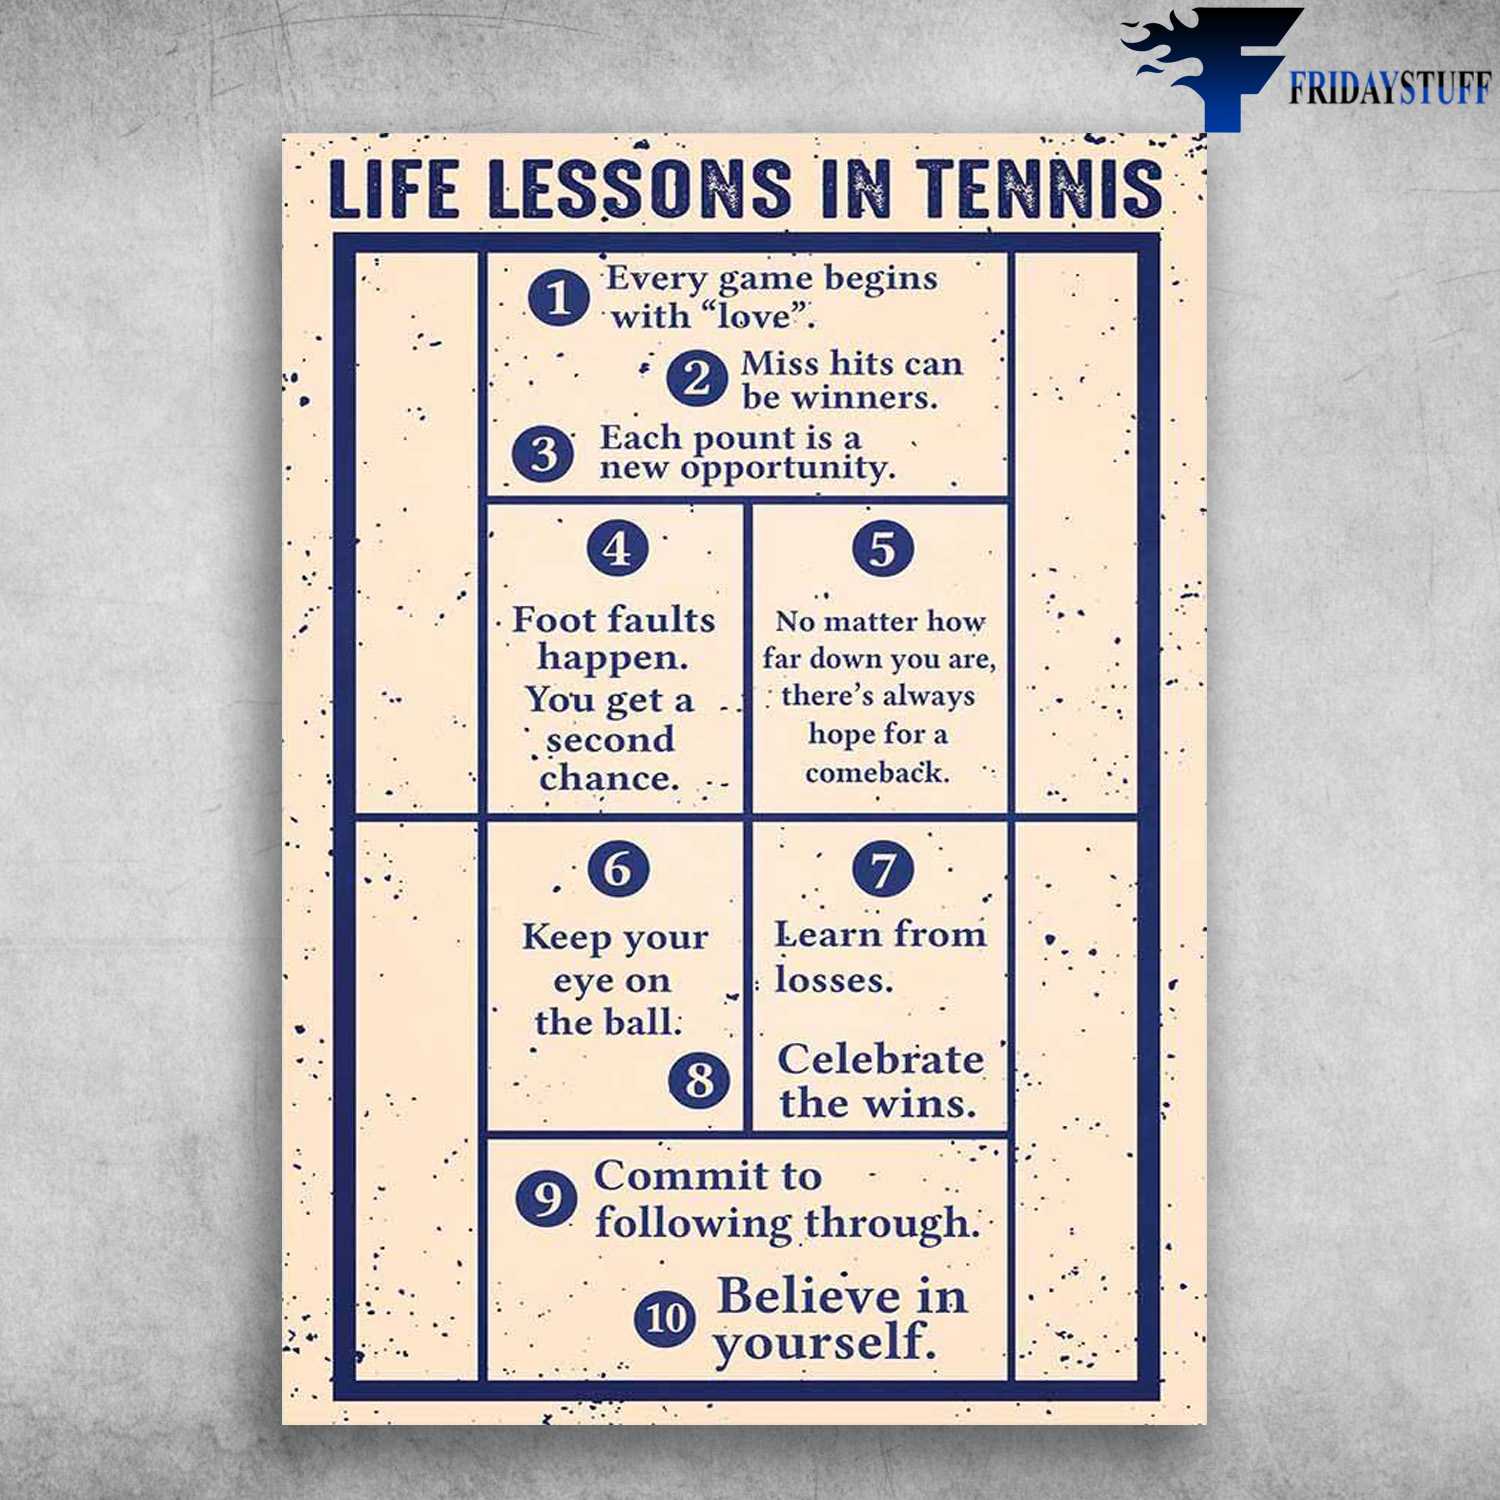 Tennis Poster, Life Lessons In Tennis - Every Game Begins With Love, Miss Hits Can Be Winners, Each Pount Is A New Opportunity, Foot Faults Happen, You Get A Second Chance